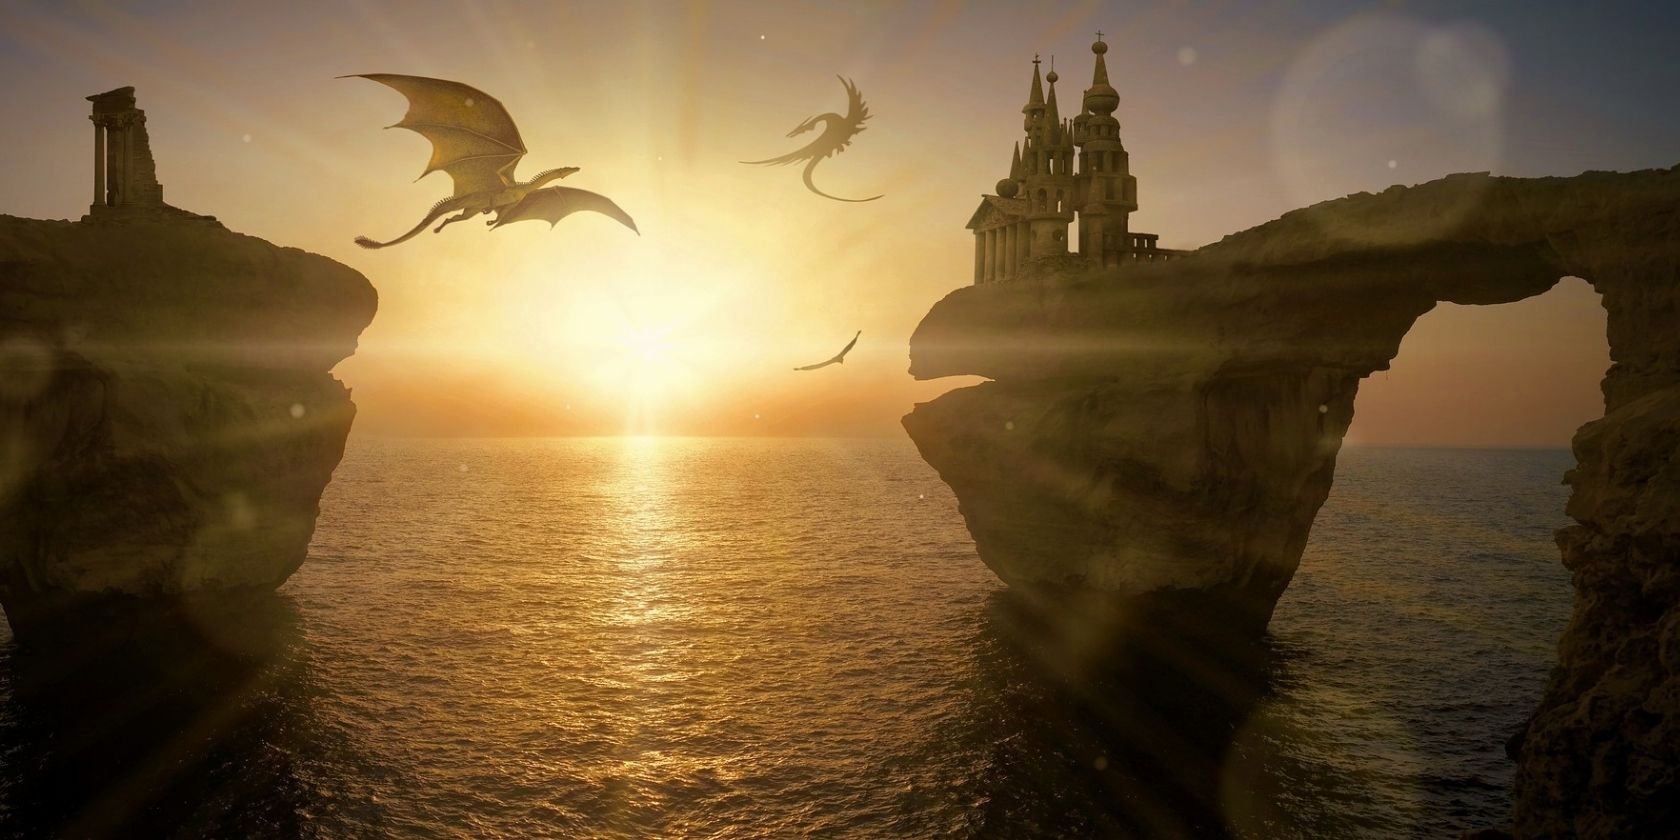 An image of dragons flying over an ocean. 